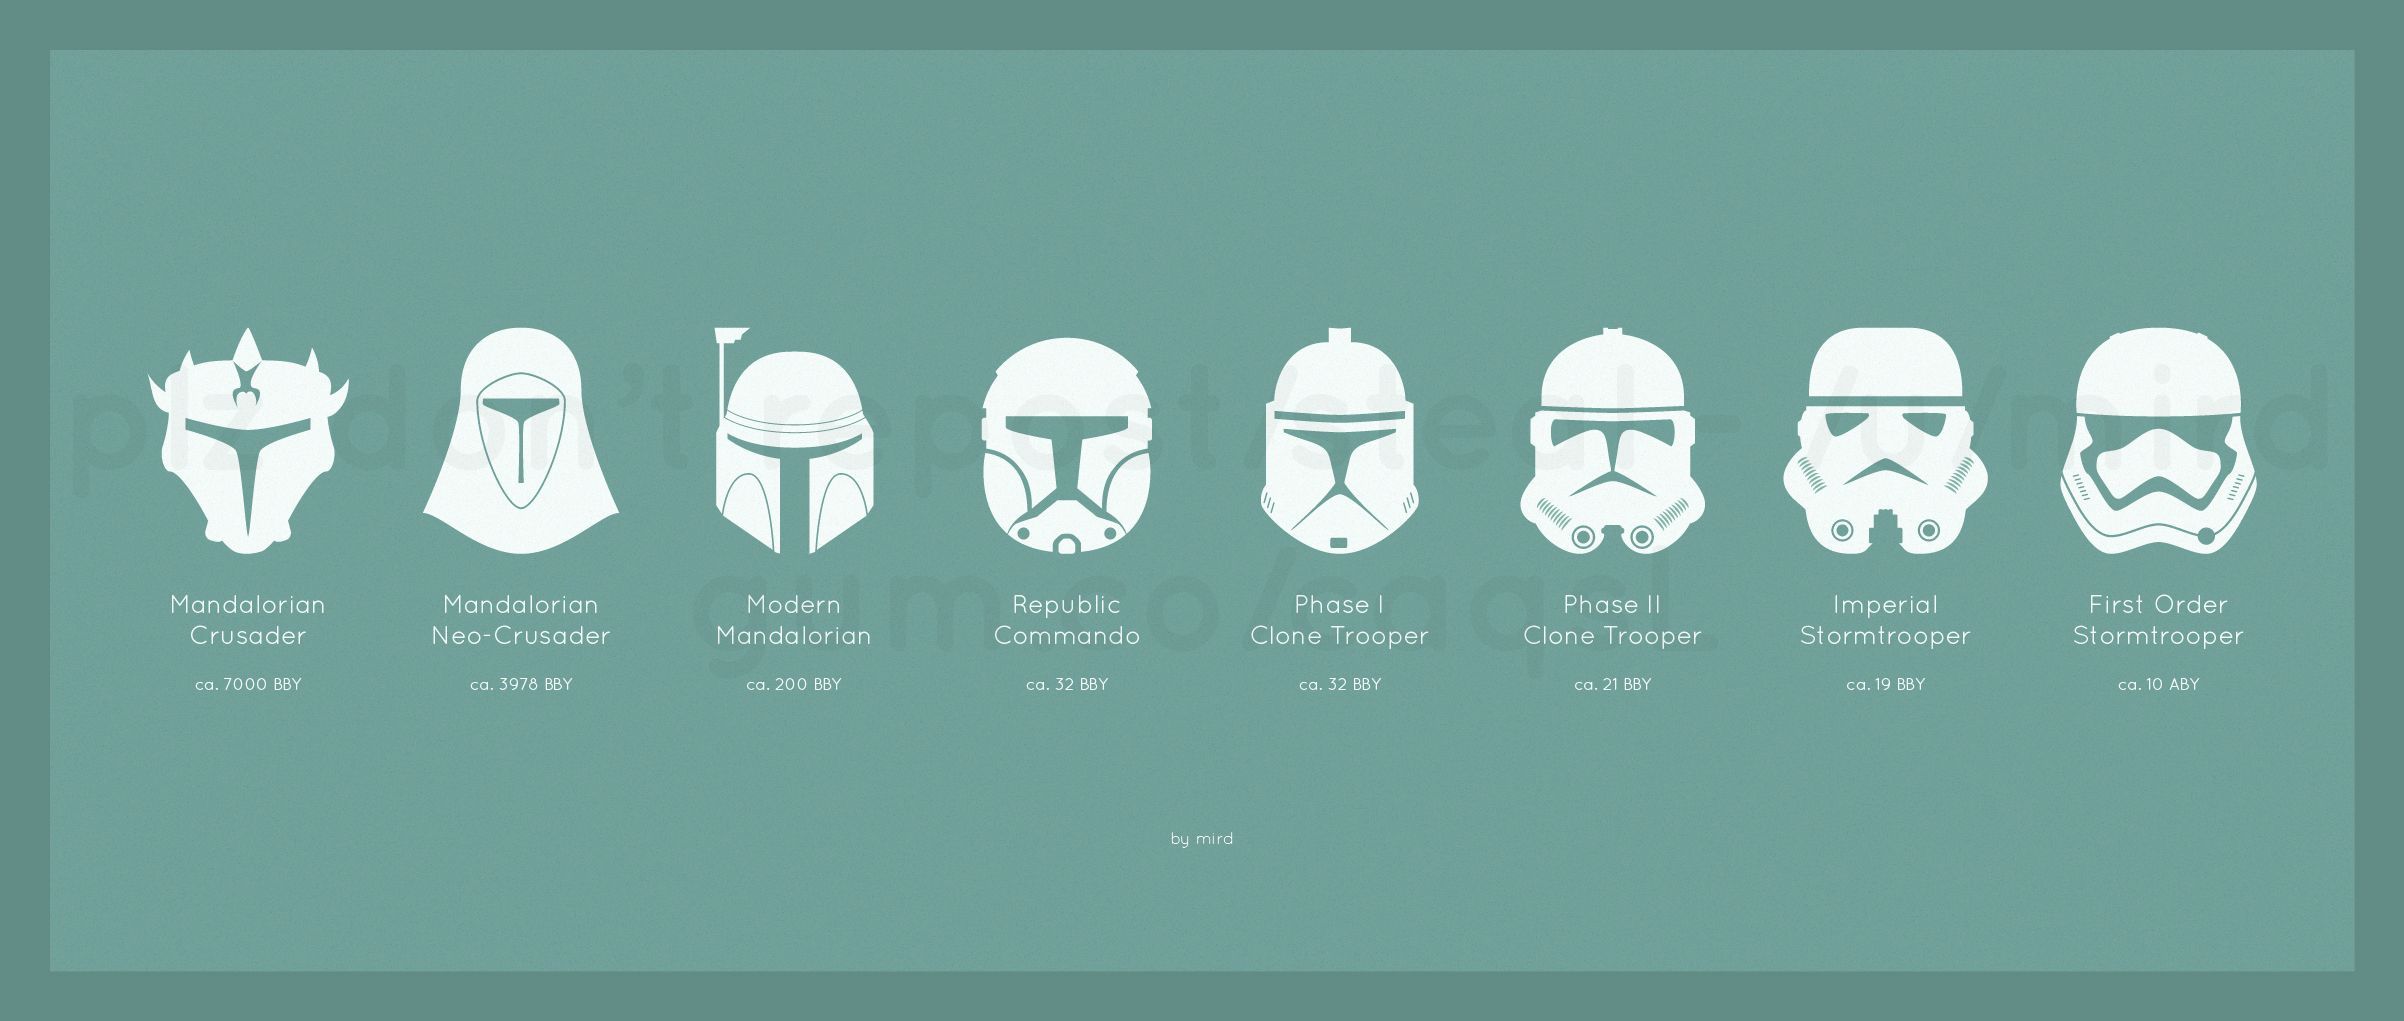 Evolution of Military Helmet Design from Mandalorian Crusaders to First Order Stormtroopers (Updated!)